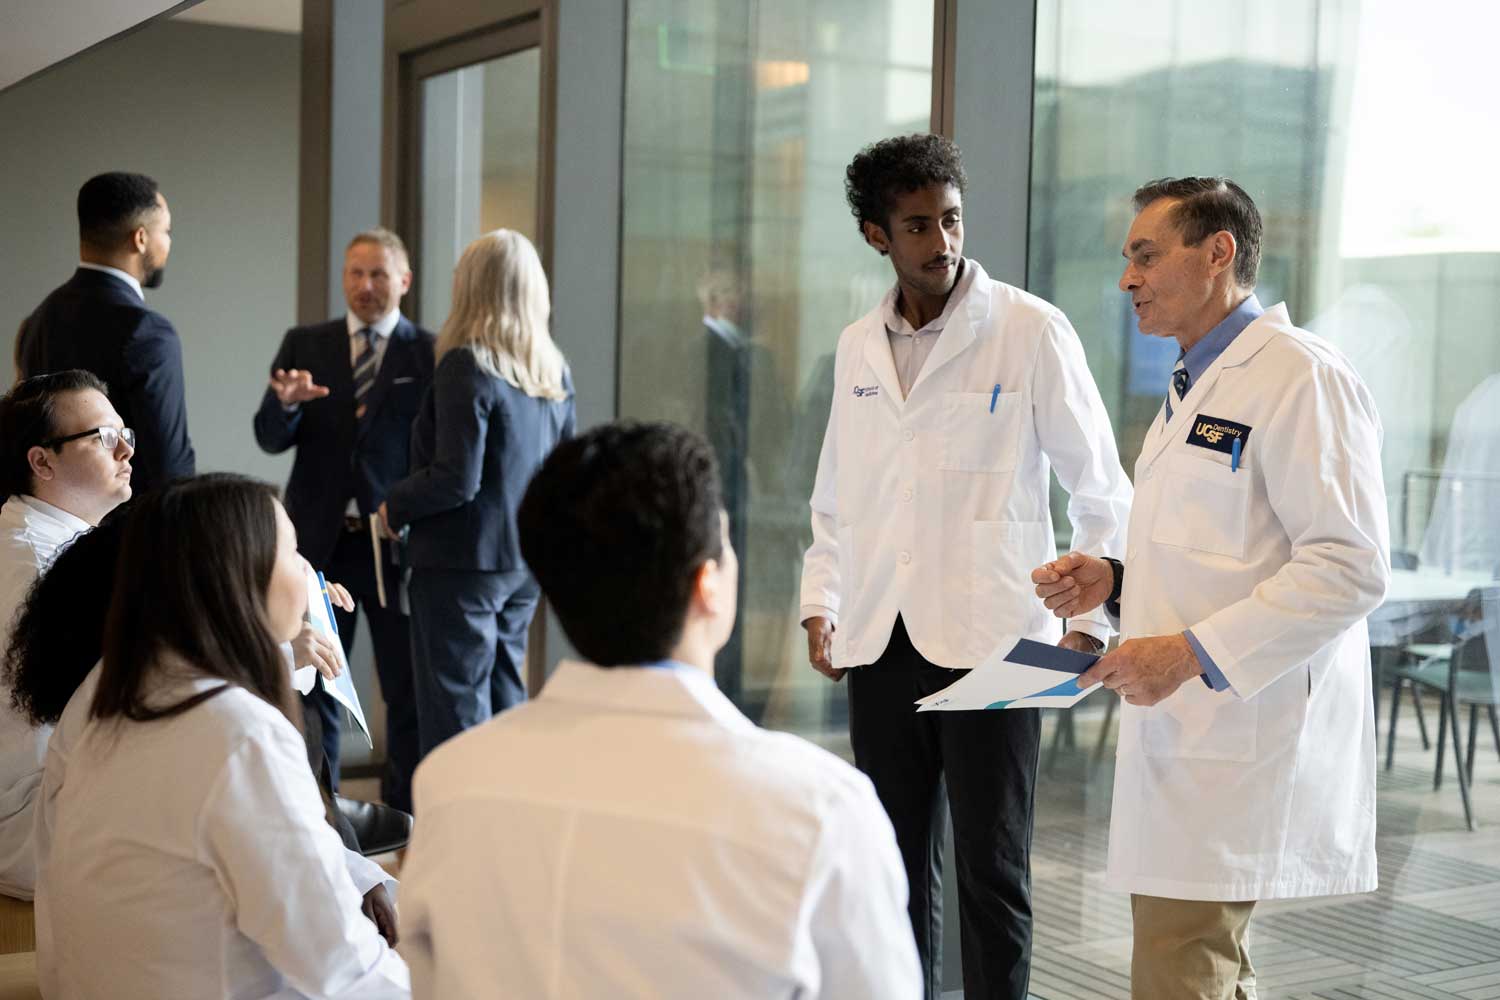 A group of medical, dental, and pharmaceutical students wearing white coats sit in a glassy atrium.